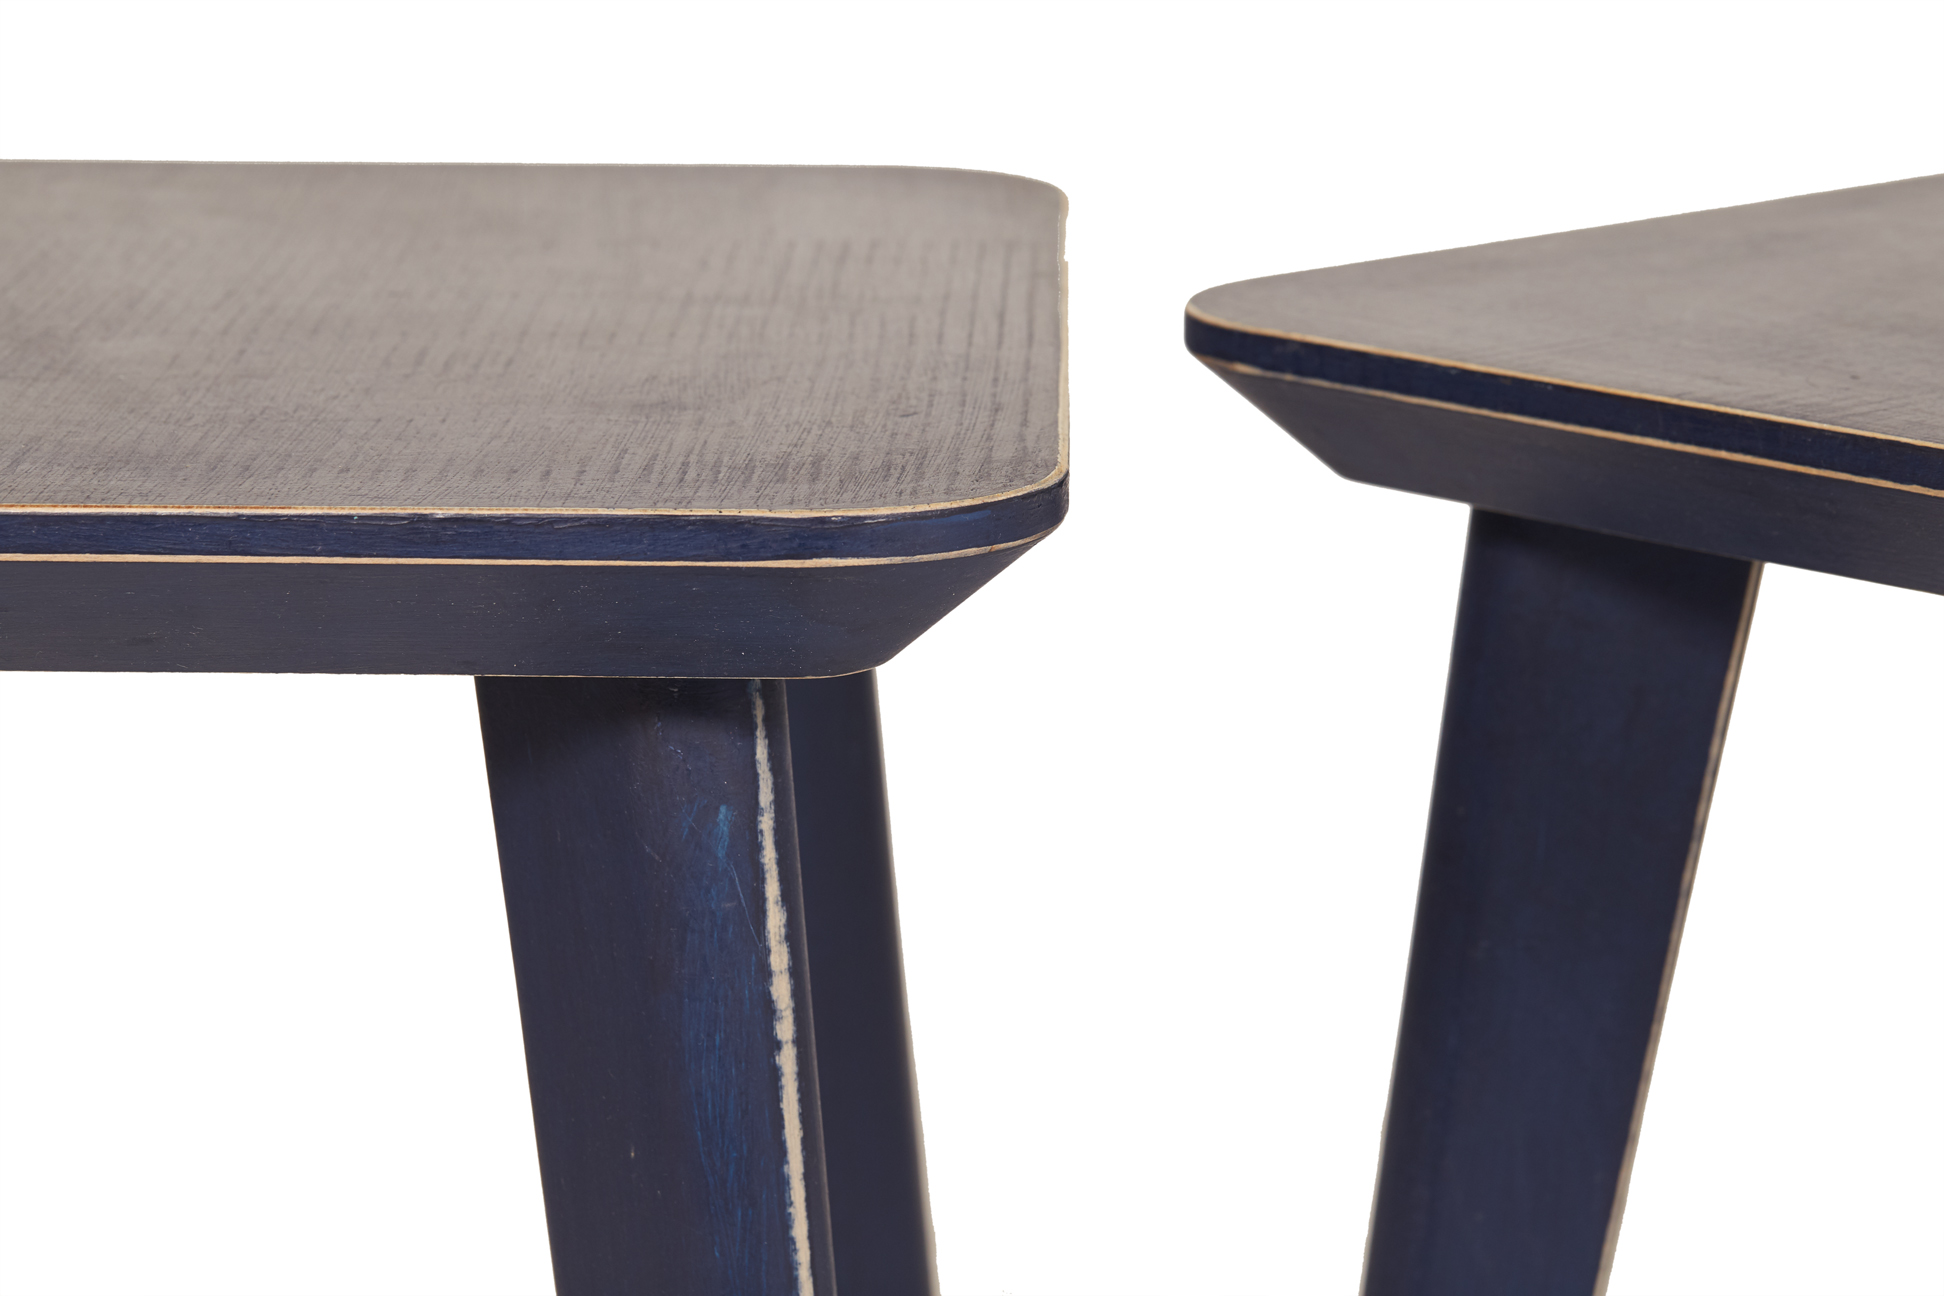 A PAIR OF BLUE PAINTED SIDE TABLES AND A COFFEE TABLE - Image 3 of 4